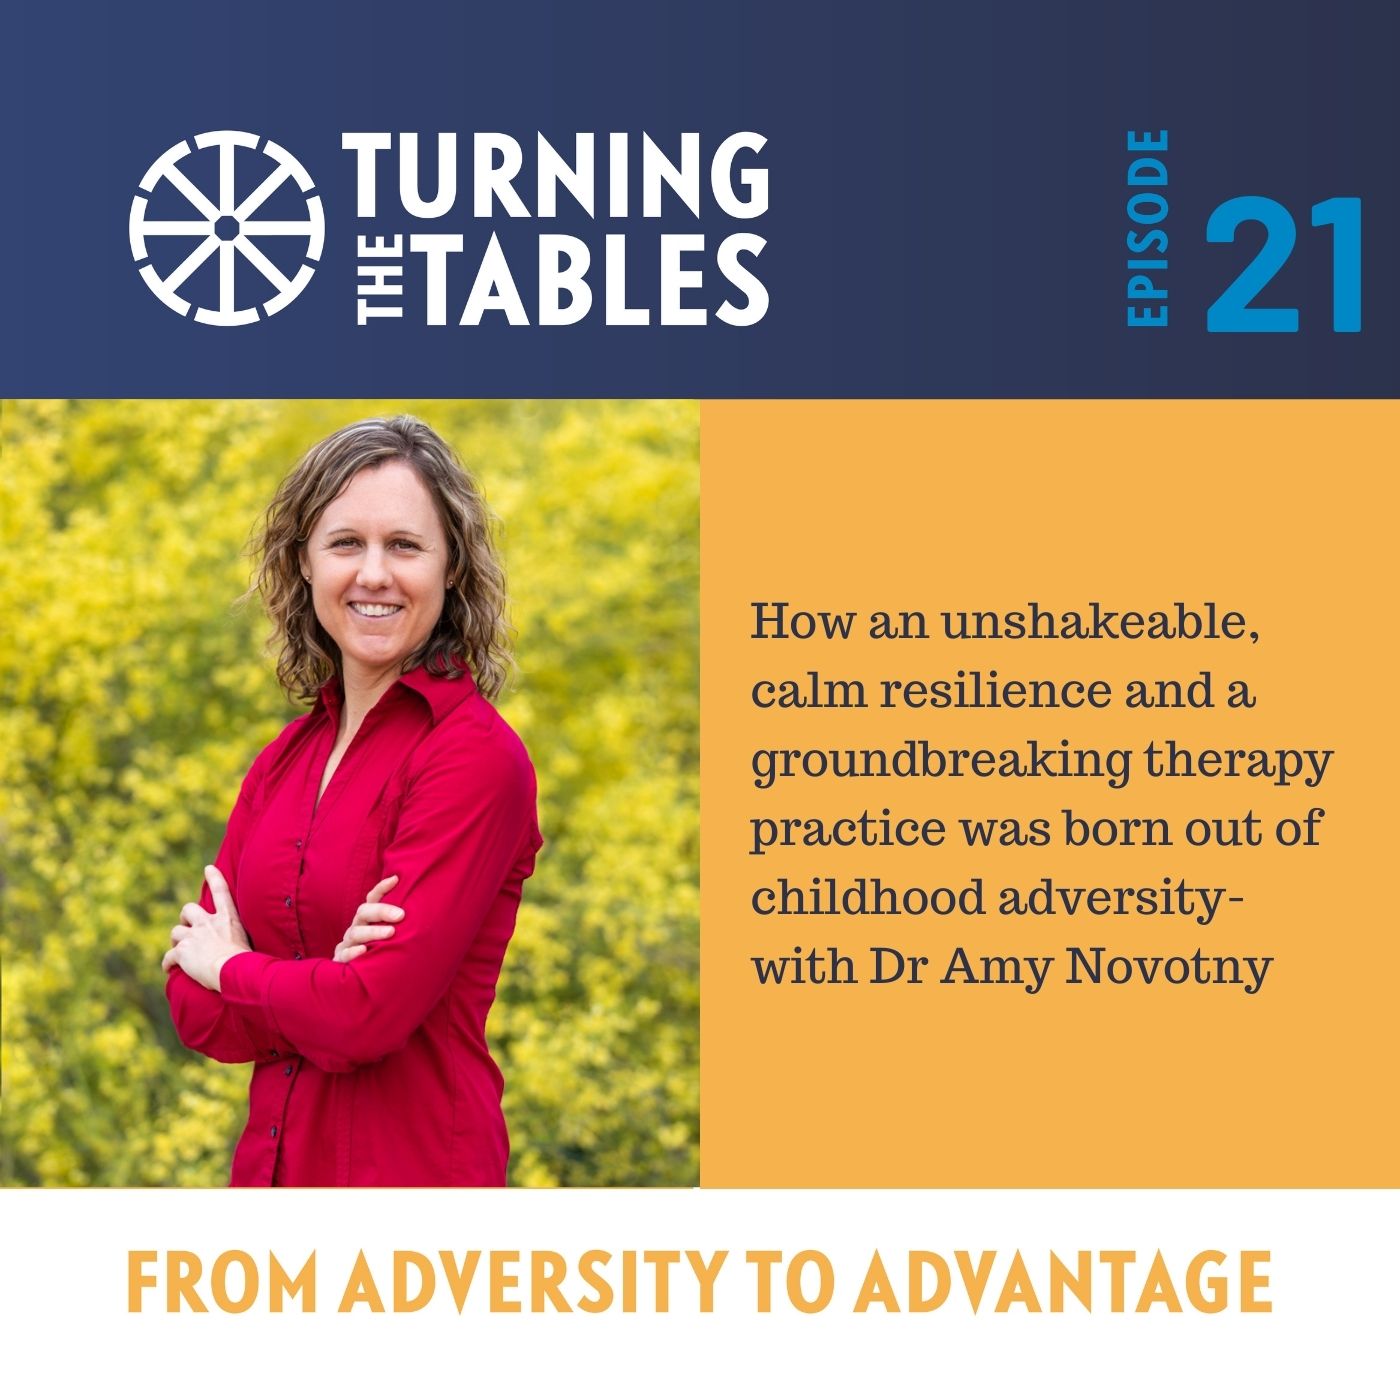 EP 21: How an unshakeable, calm resilience and a groundbreaking therapy practice was born through childhood adversity with Dr Amy Novotny Image